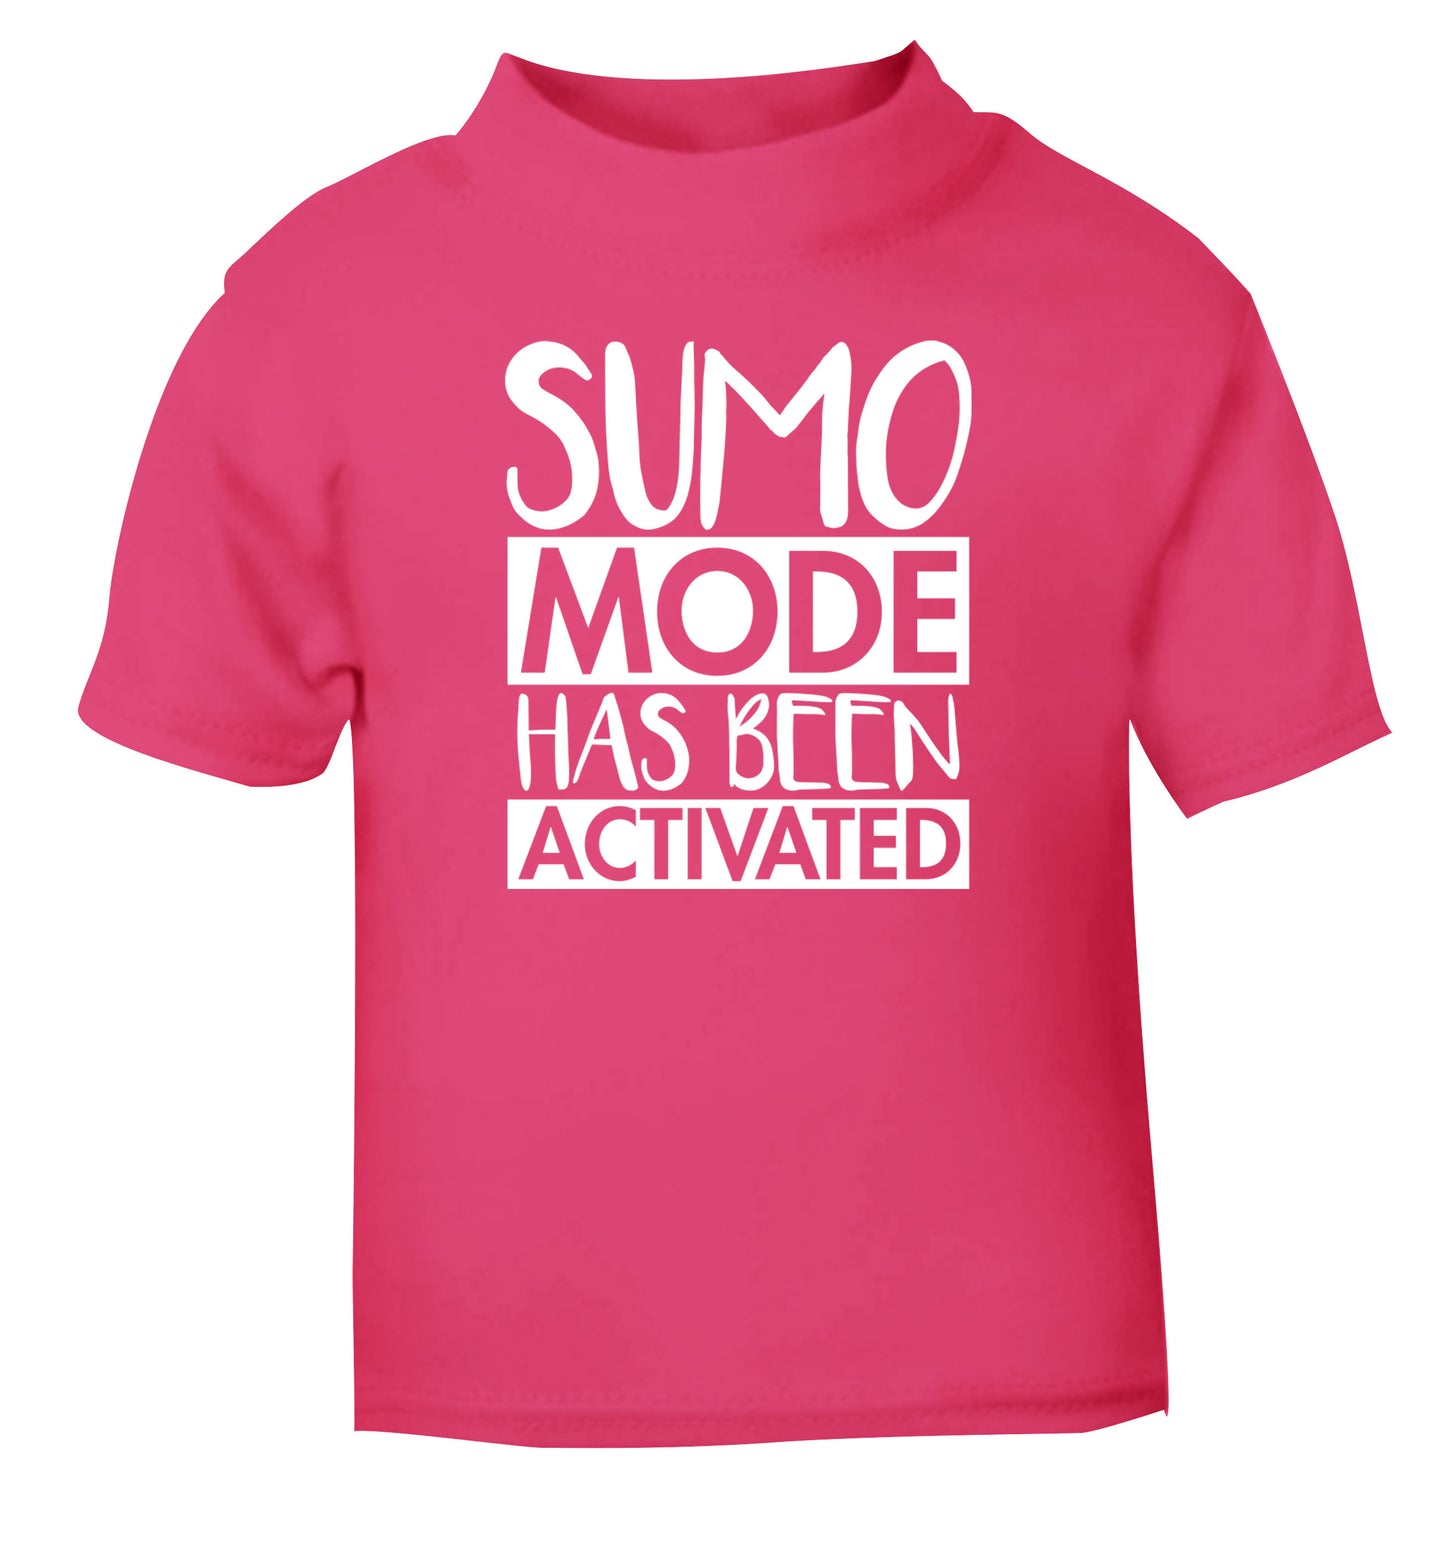 Sumo mode activated pink Baby Toddler Tshirt 2 Years